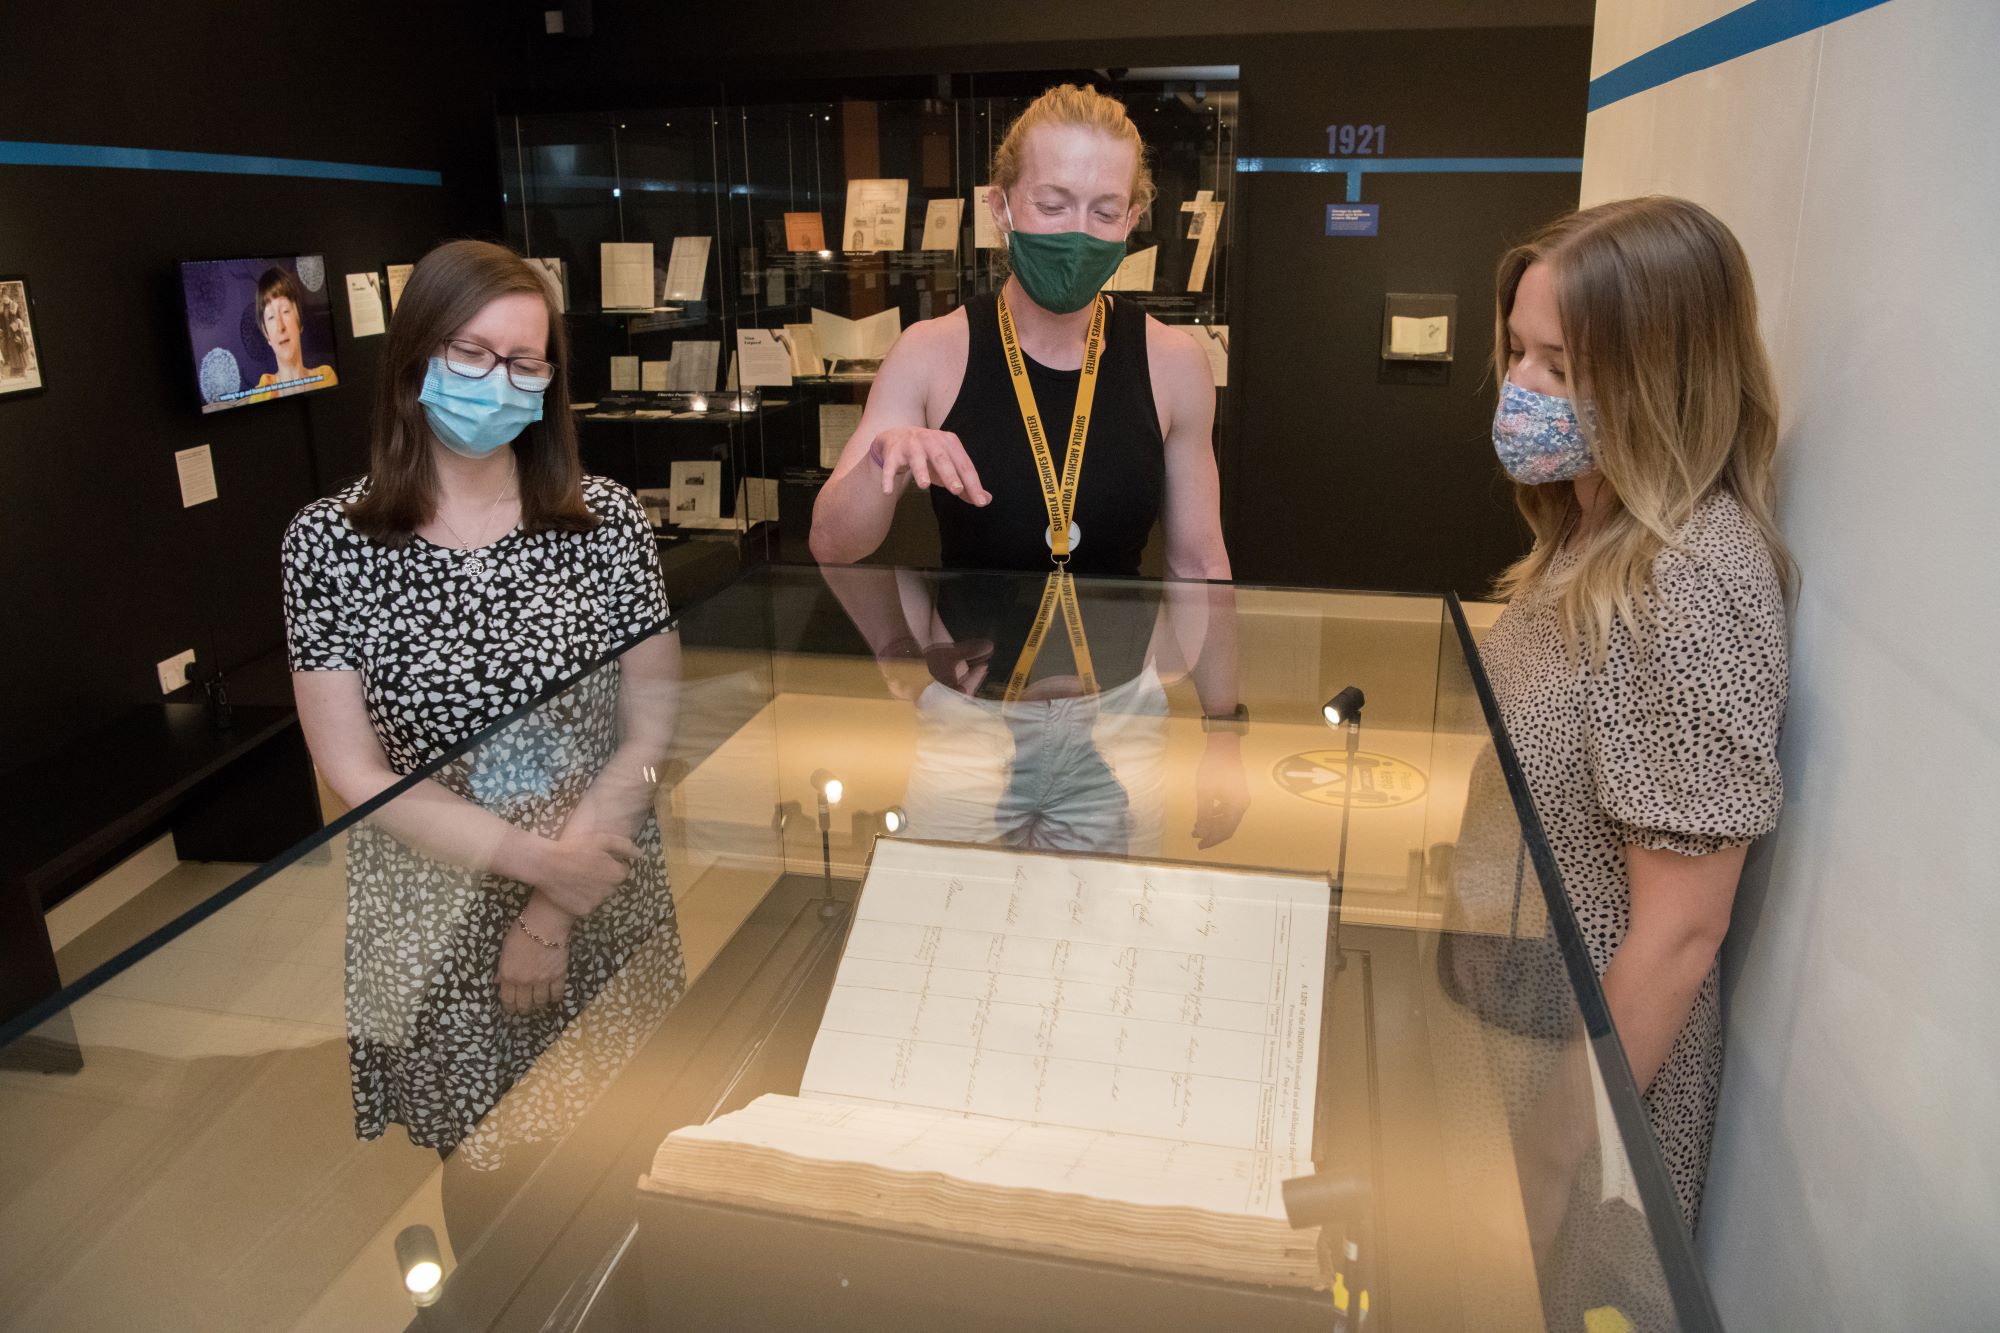 Three people gathered round a large book in a glass exhibition case